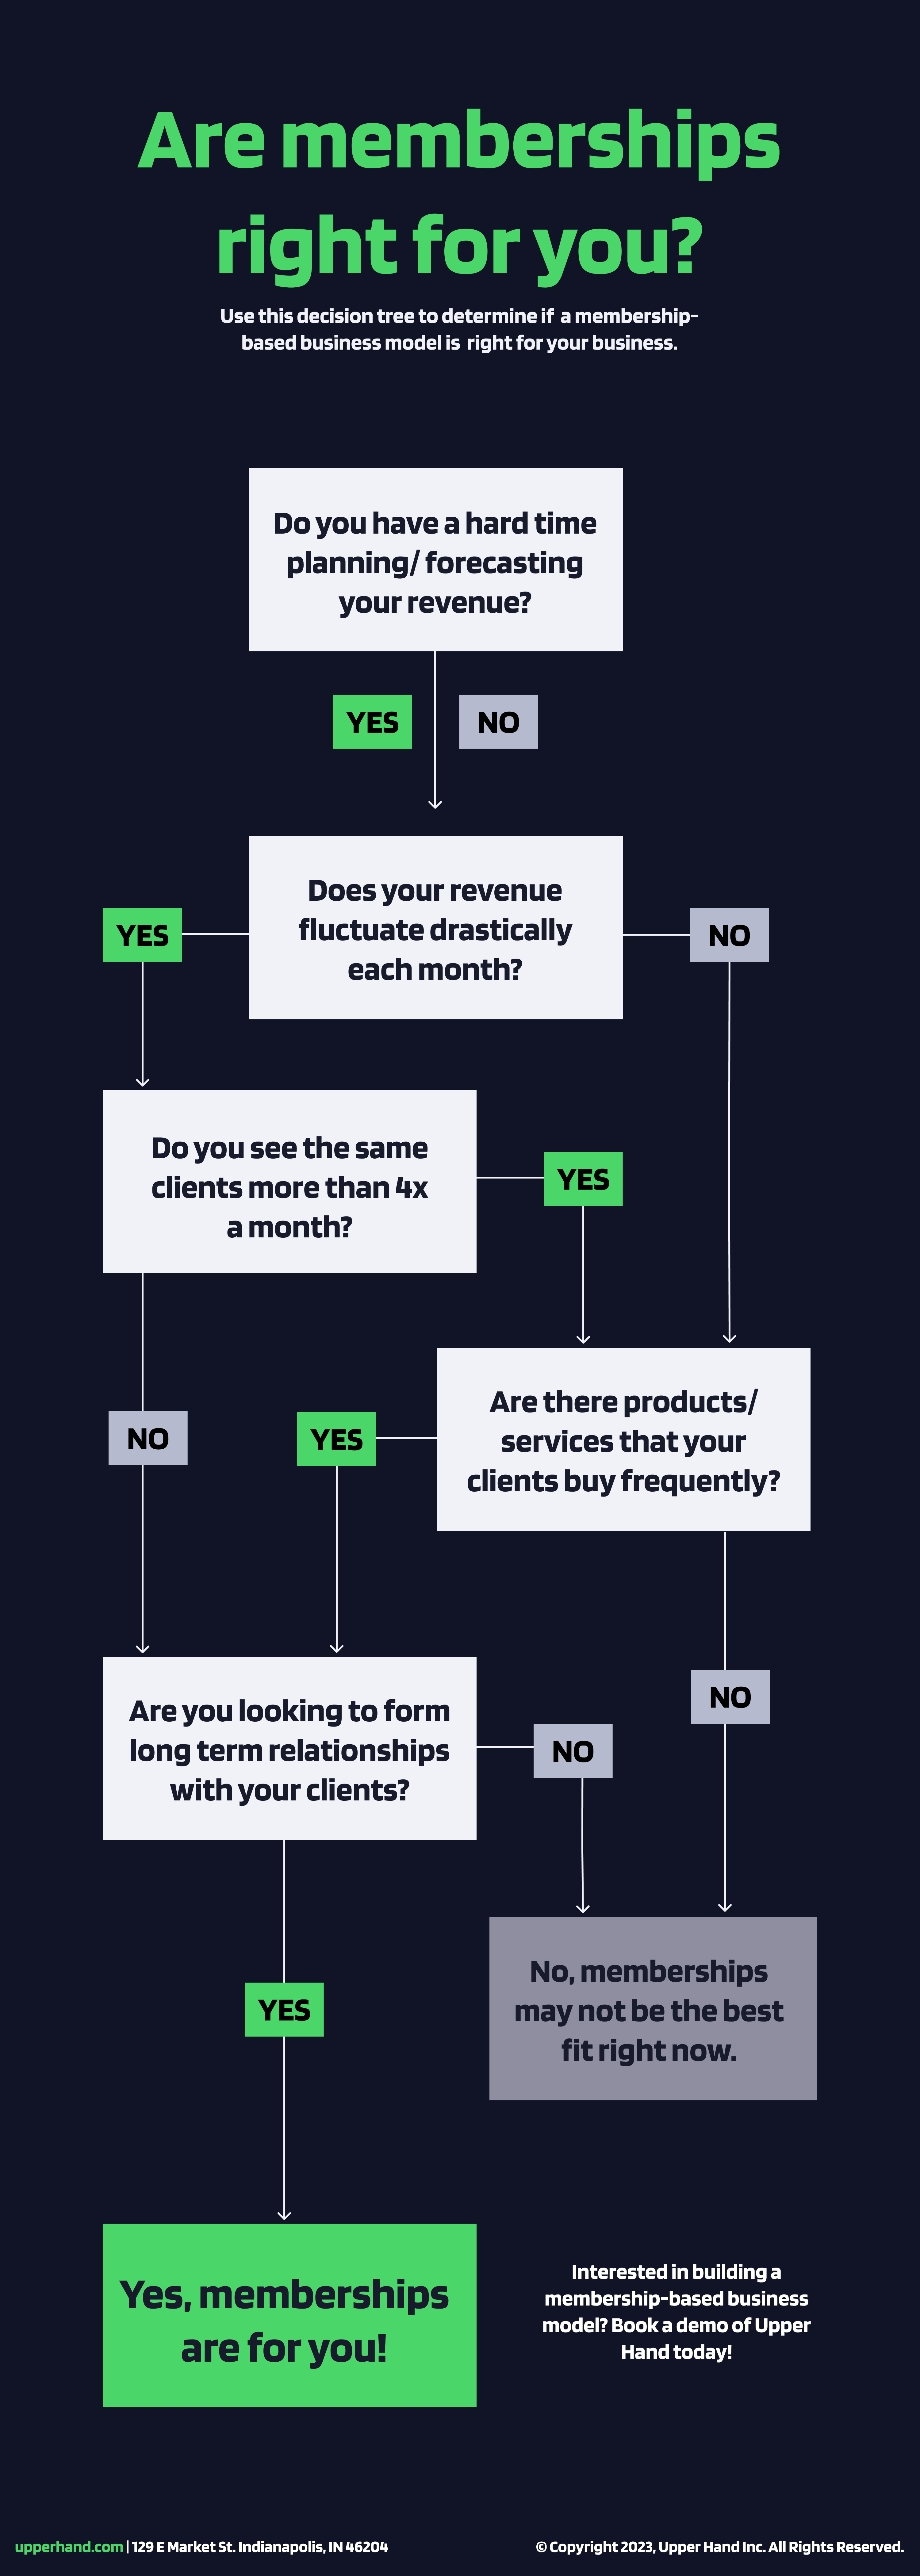 Should you utilize a membership-based business model? Use this decision tree to find out.